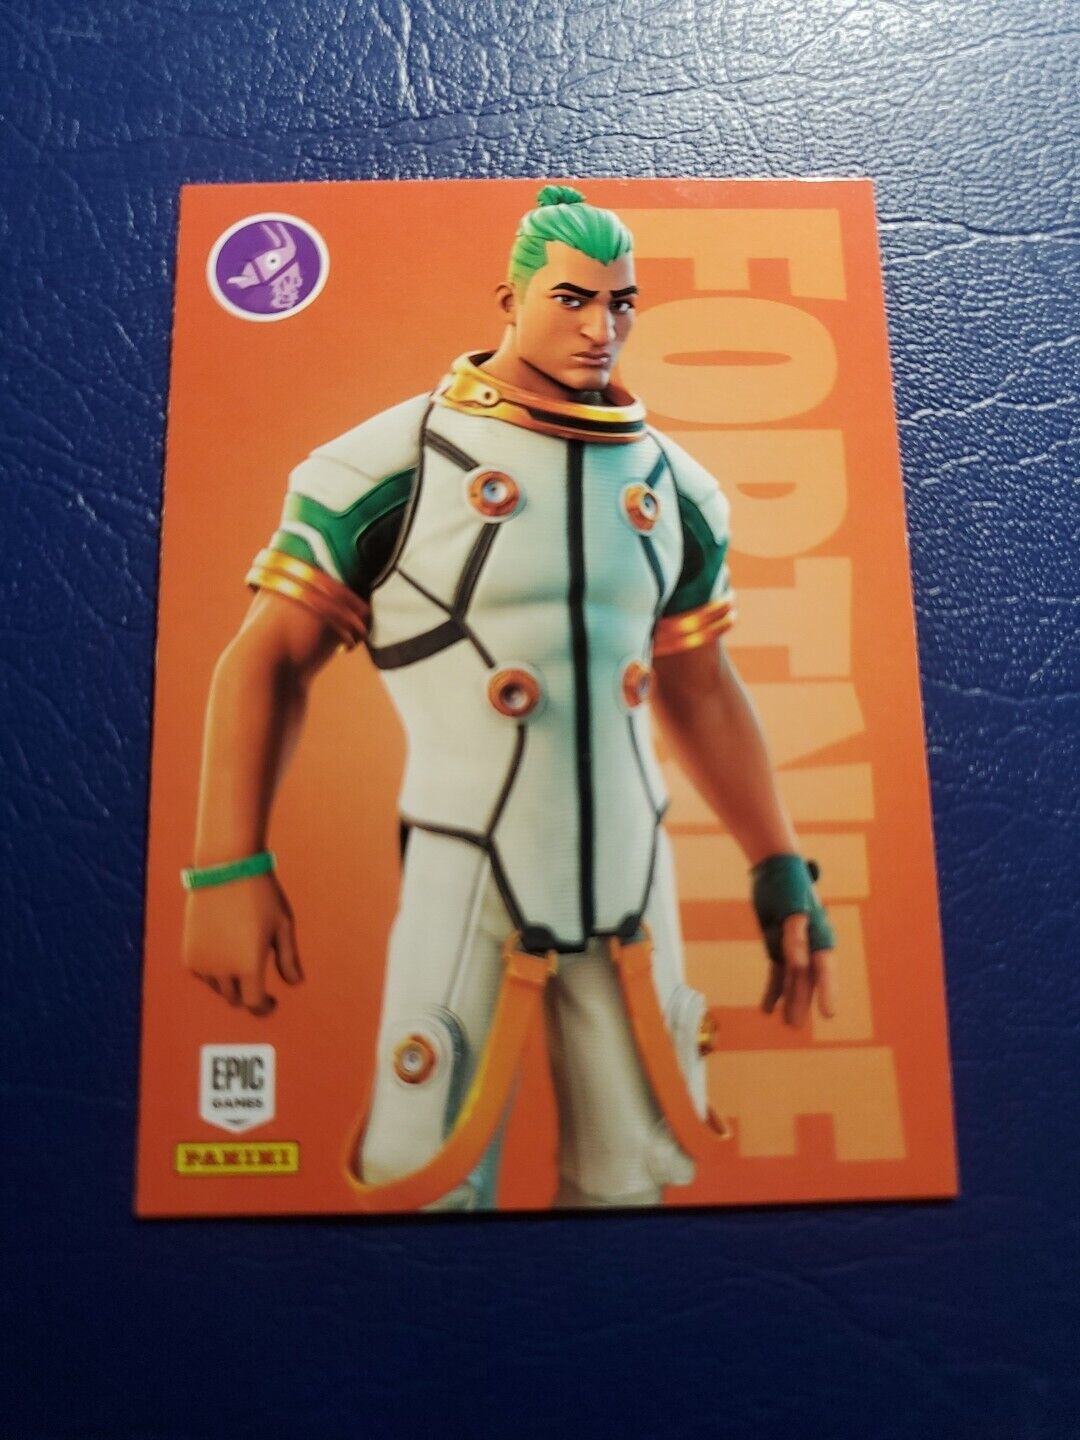 2021 Panini Fortnite Series 3 Deo Epic Outfit #121